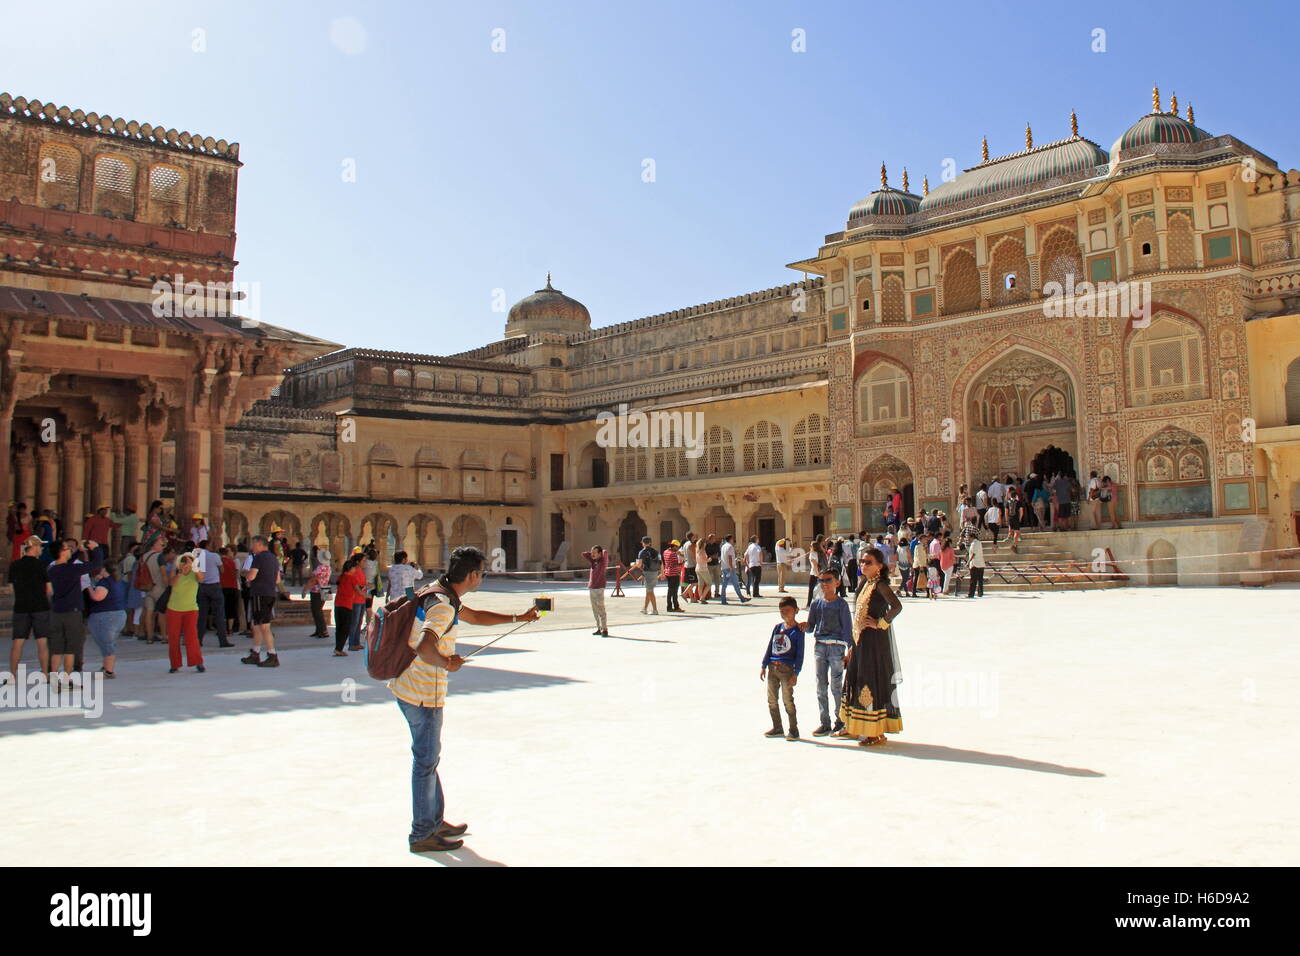 Ganesh Pol, Amer (or Amber) Fort, Amer, Jaipur, Rajasthan, India, Indian subcontinent, South Asia Stock Photo